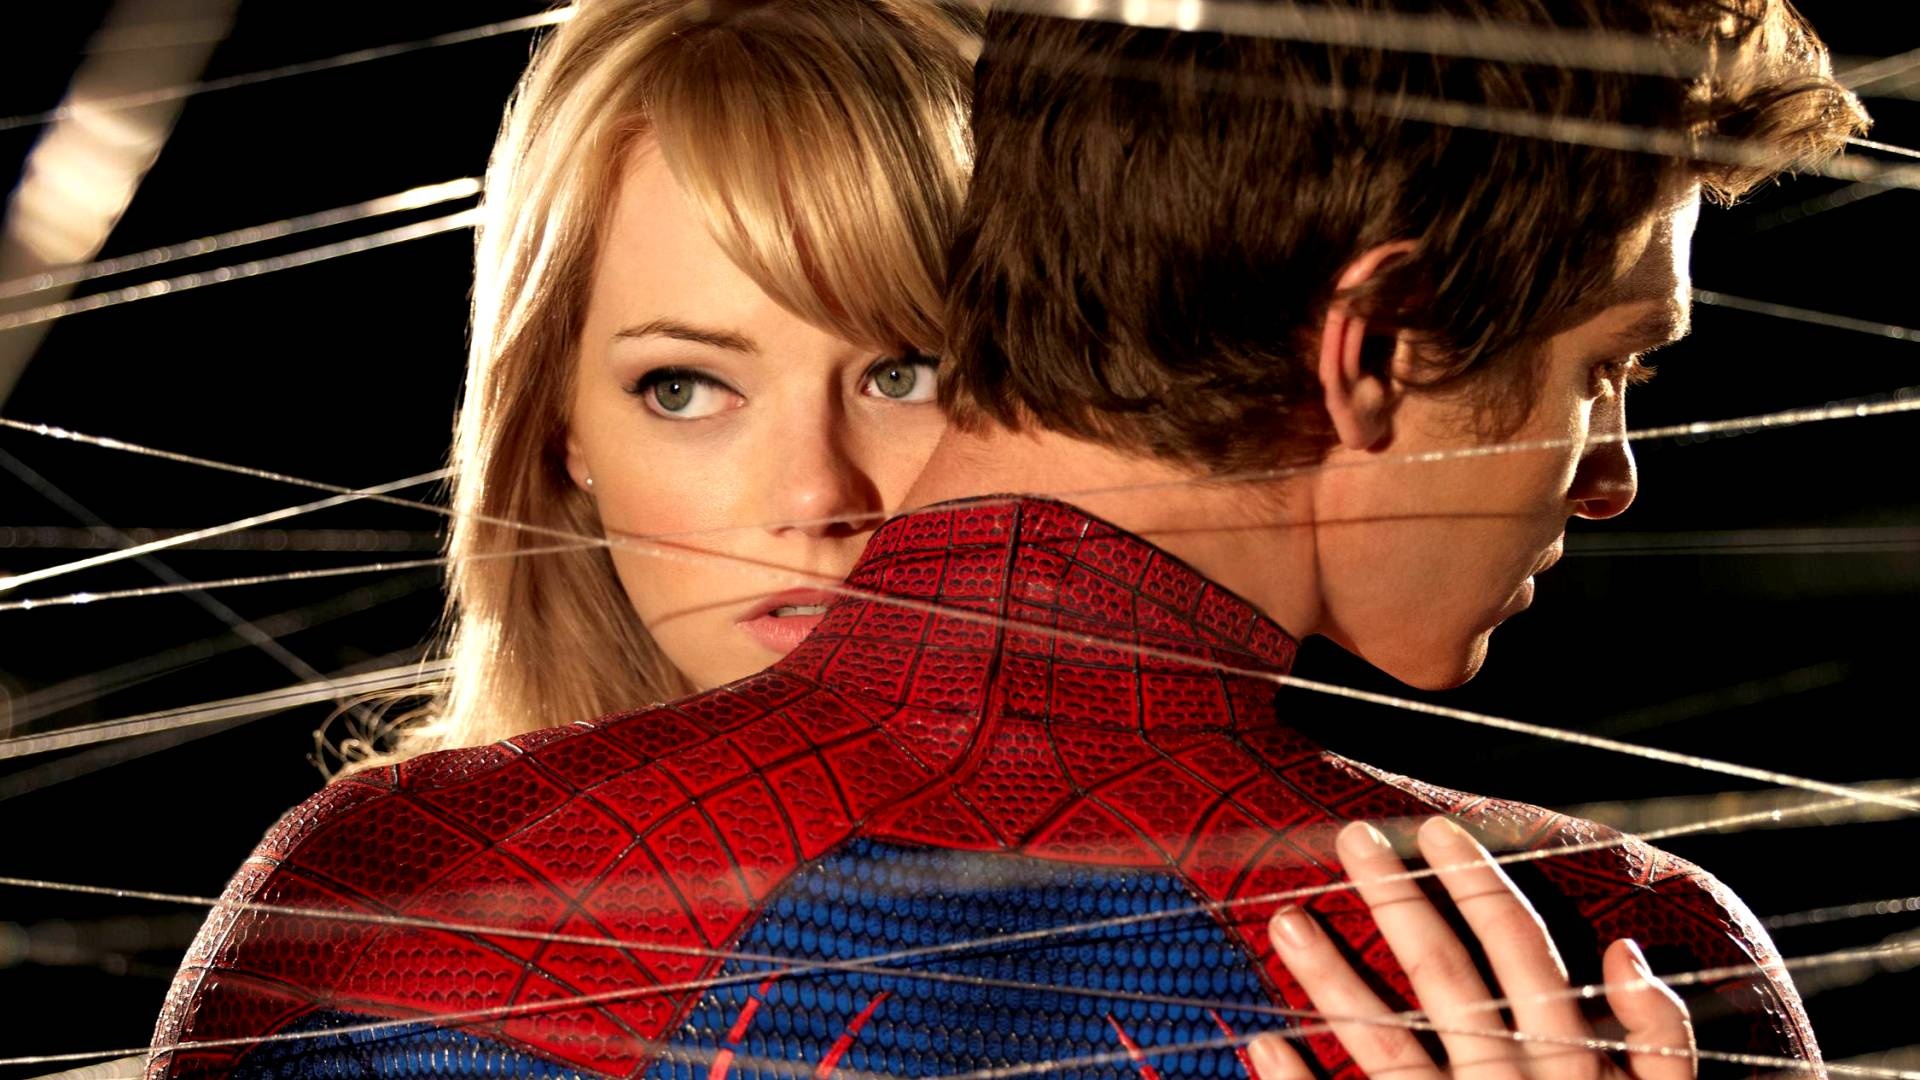 Peter and Gwen, Peter Parker and Gwen Stacy, Emotional wallpaper, Power of love, 1920x1080 Full HD Desktop